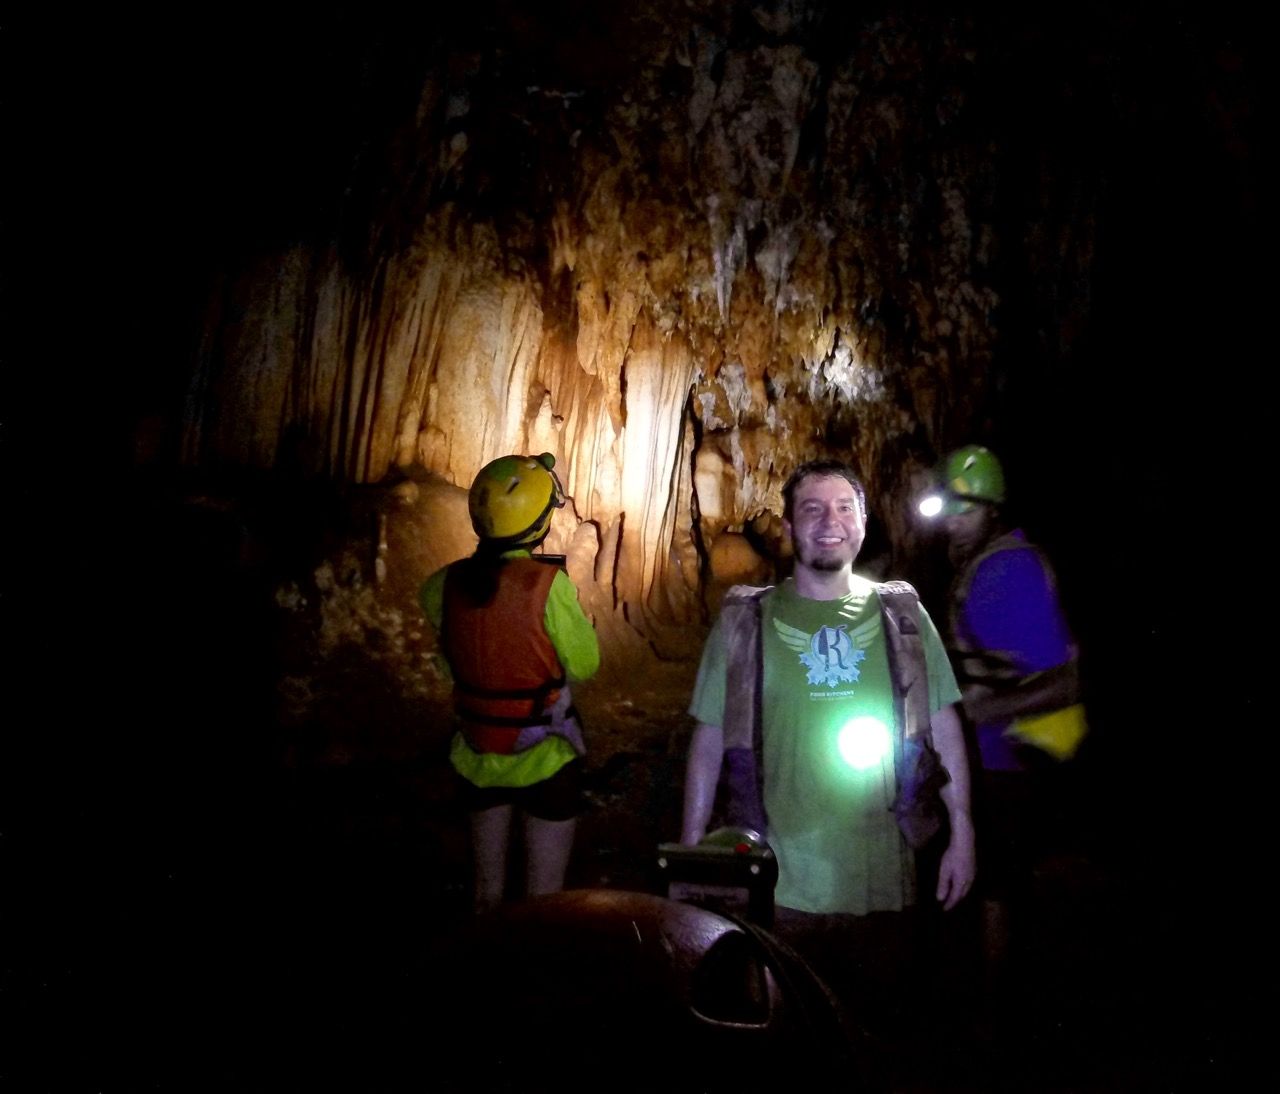 People looking at cave formations with one man smiling at the camera.